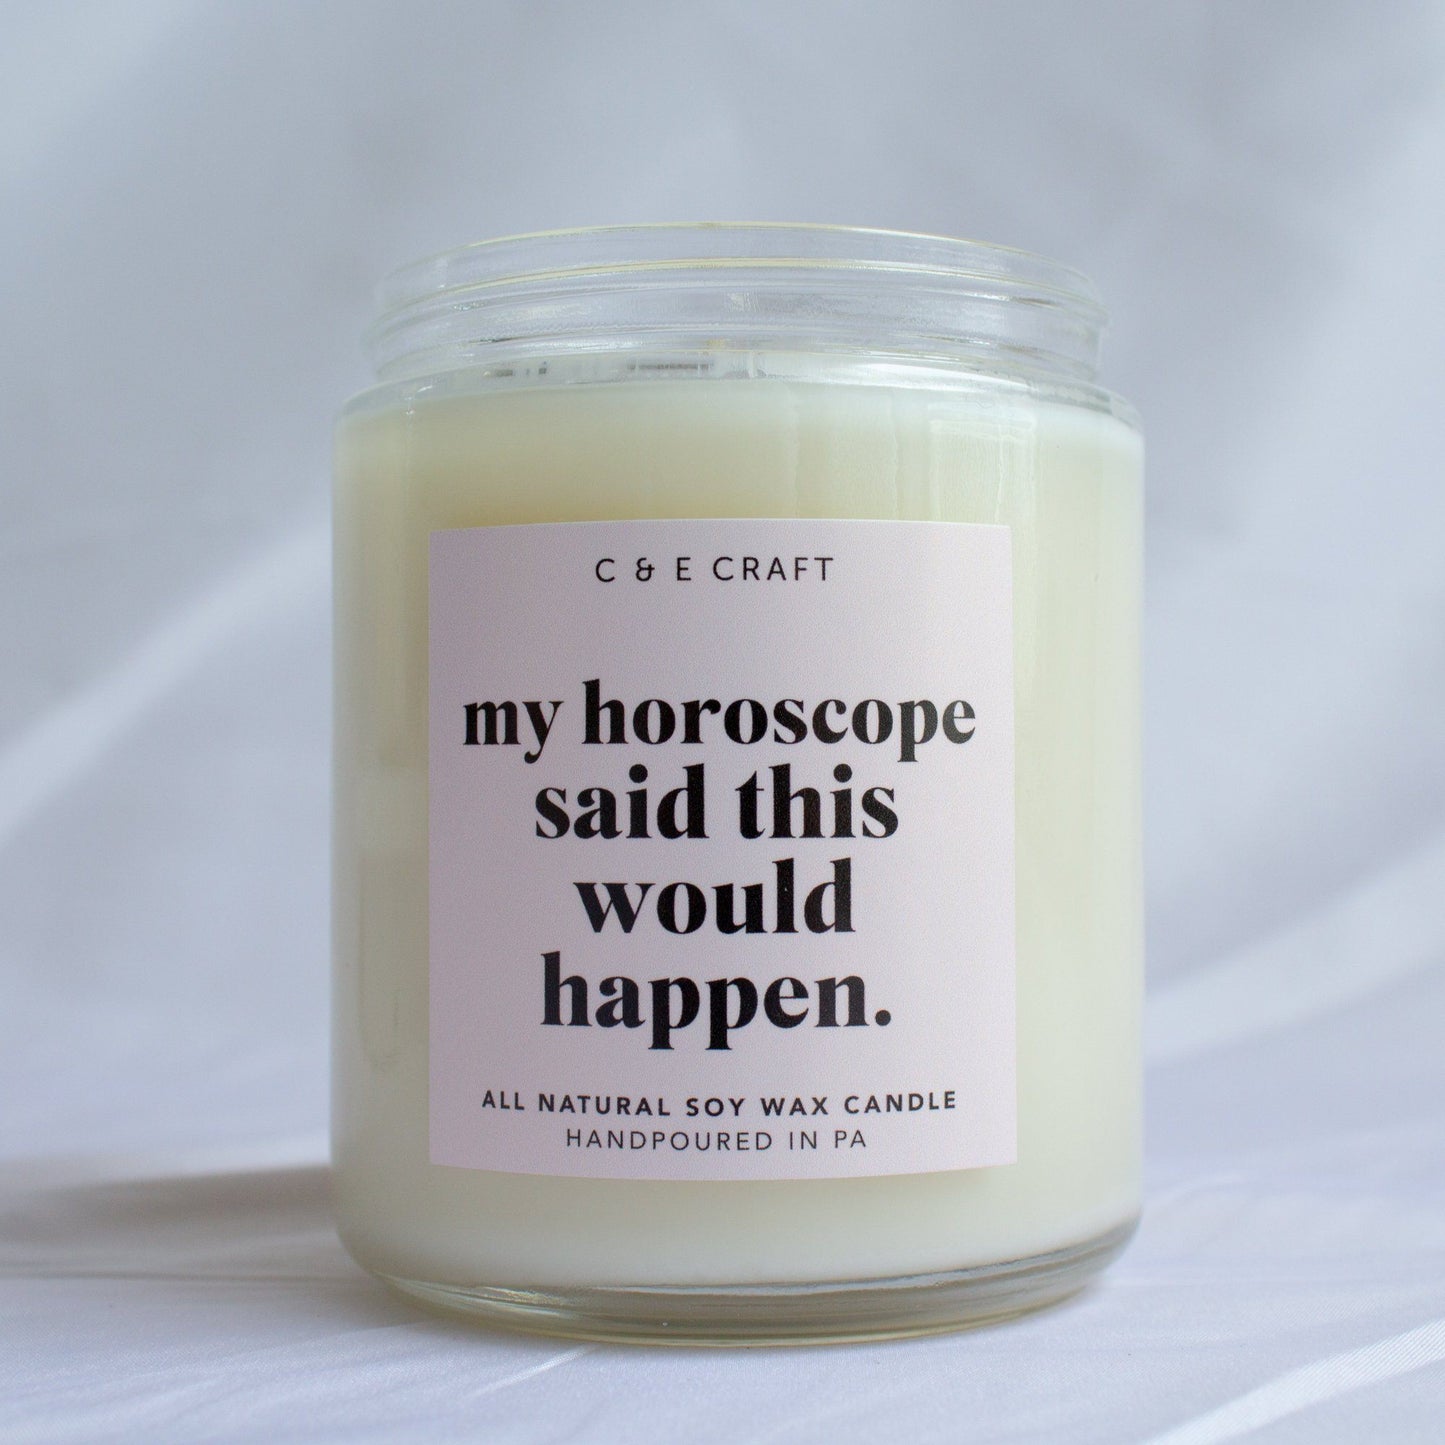 C&E - My Horoscope Said This Would Happen Candle - All Natural Soy Wax Scented Candle - Gift for Her - Funny Candle C & E Craft Co 